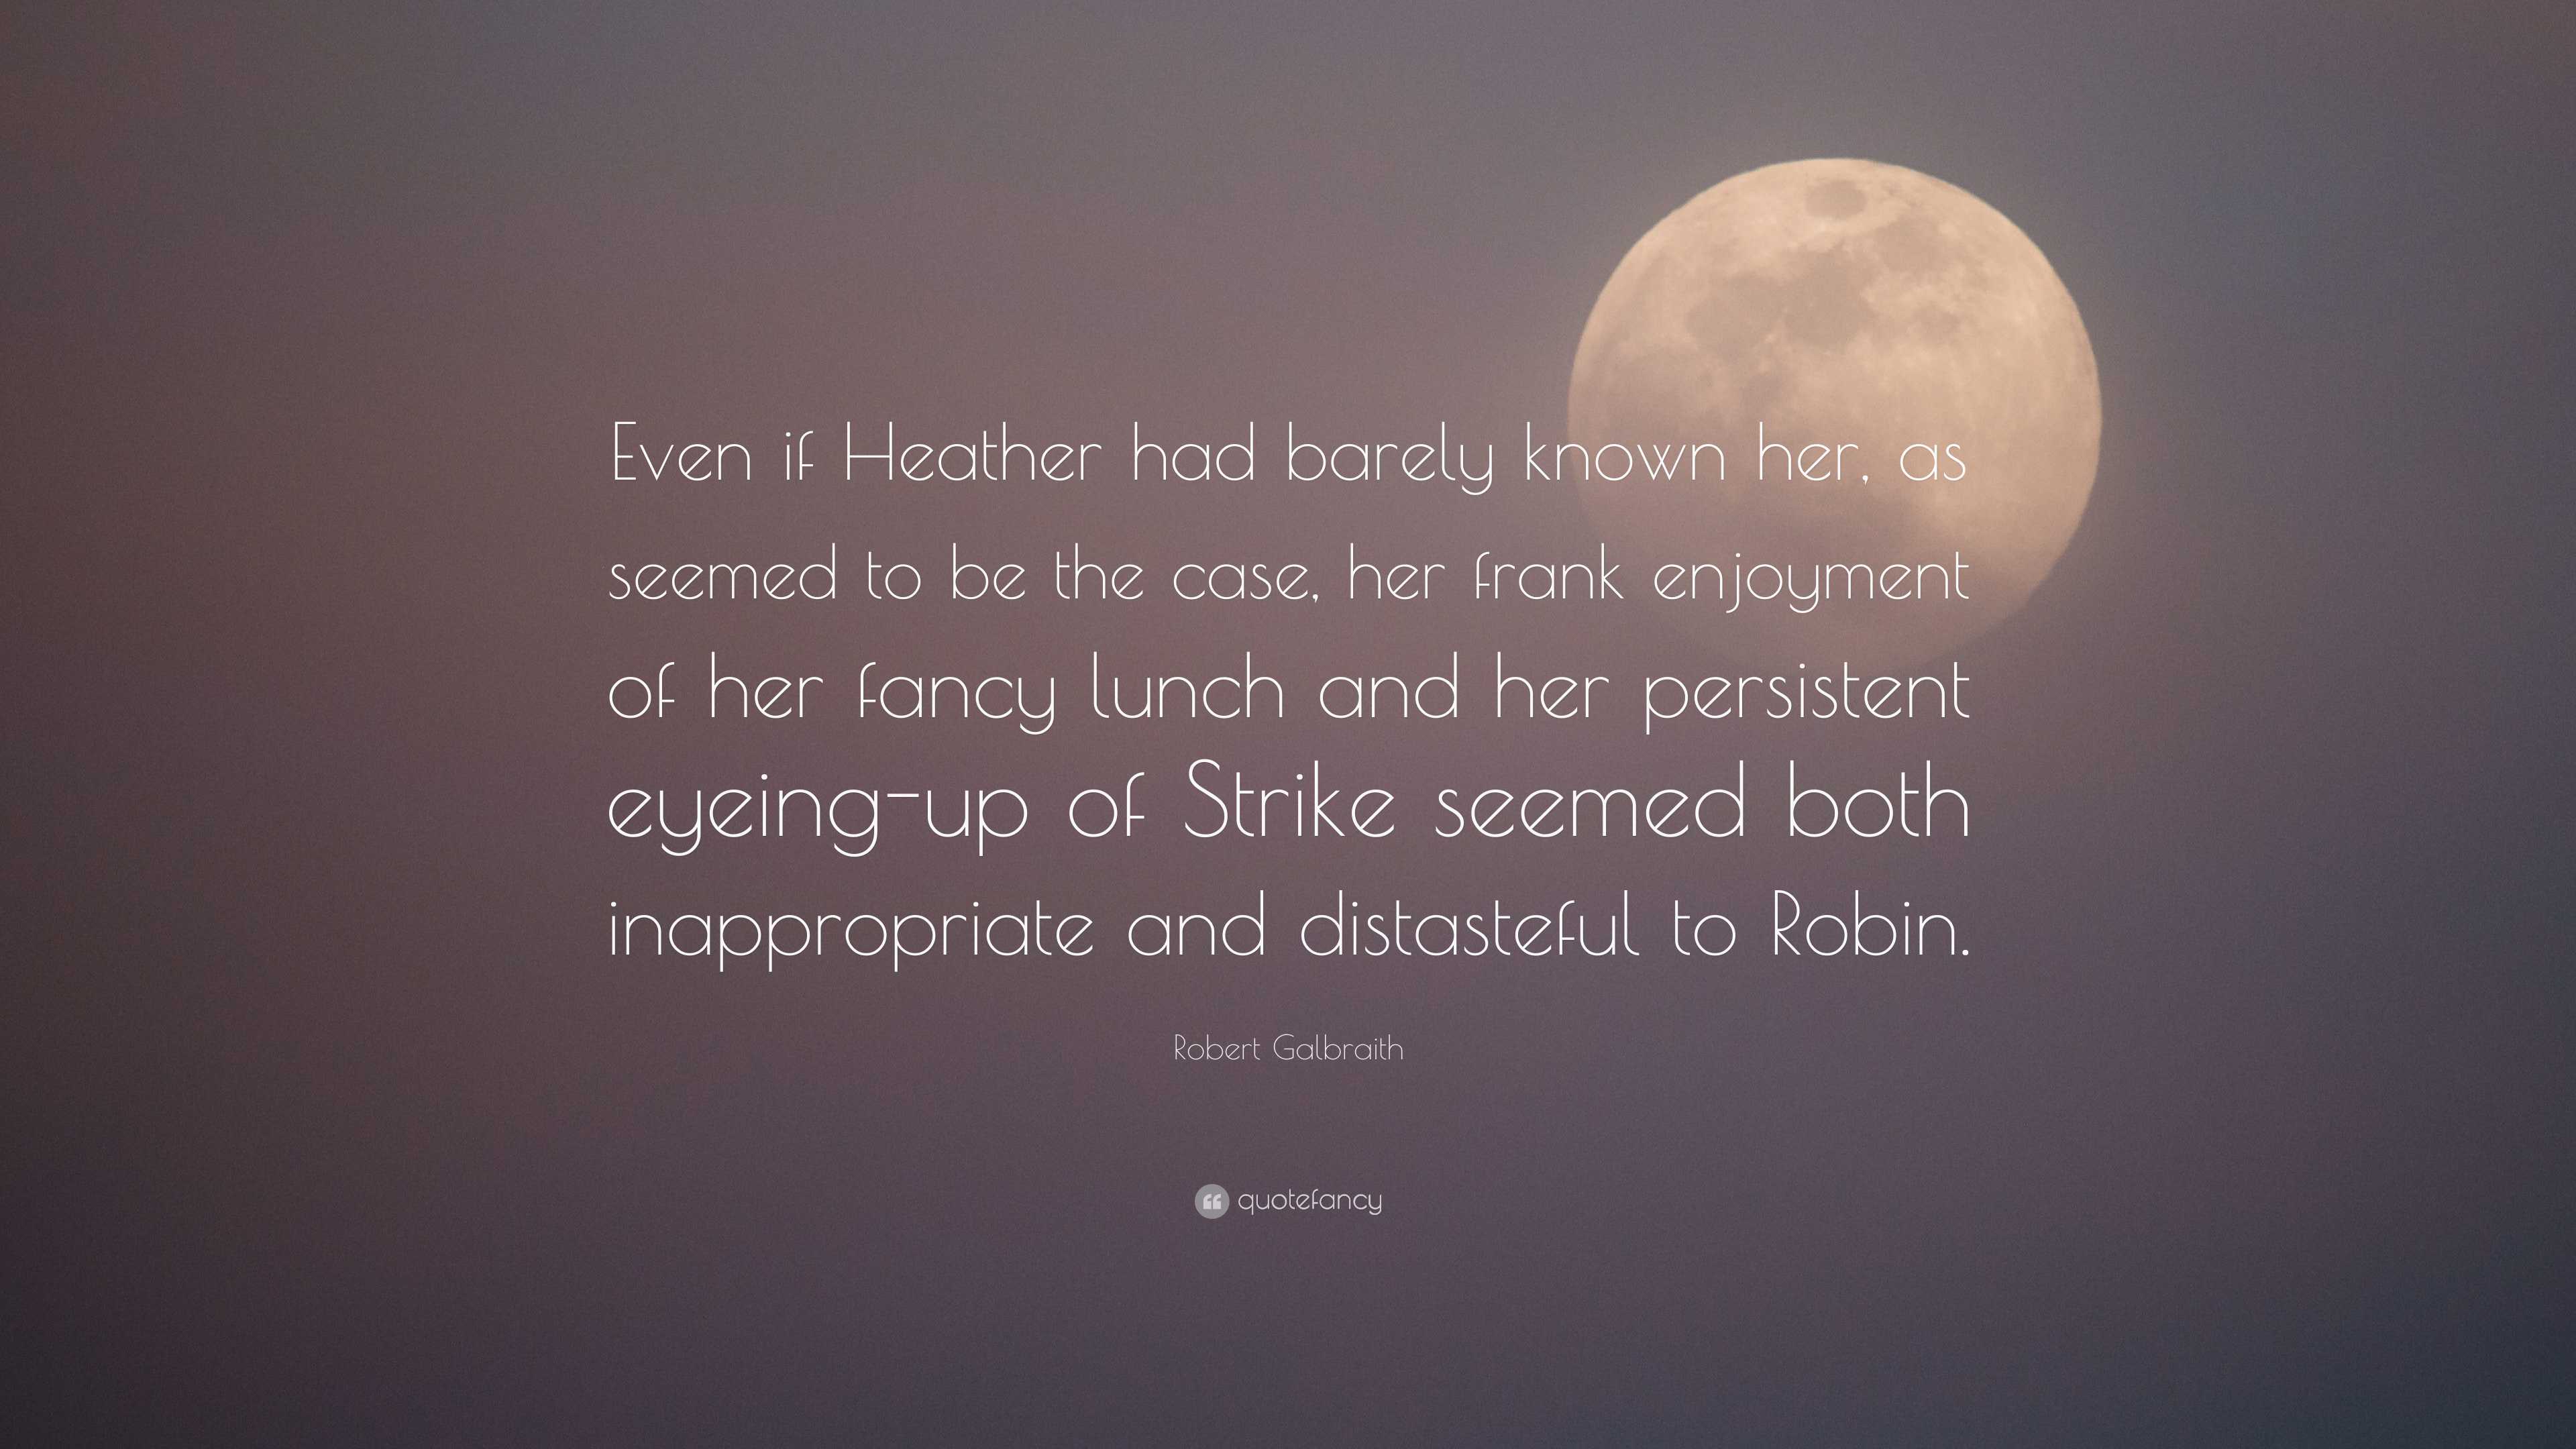 https://quotefancy.com/media/wallpaper/3840x2160/8088750-Robert-Galbraith-Quote-Even-if-Heather-had-barely-known-her-as-seemed-to-be-the-case.jpg